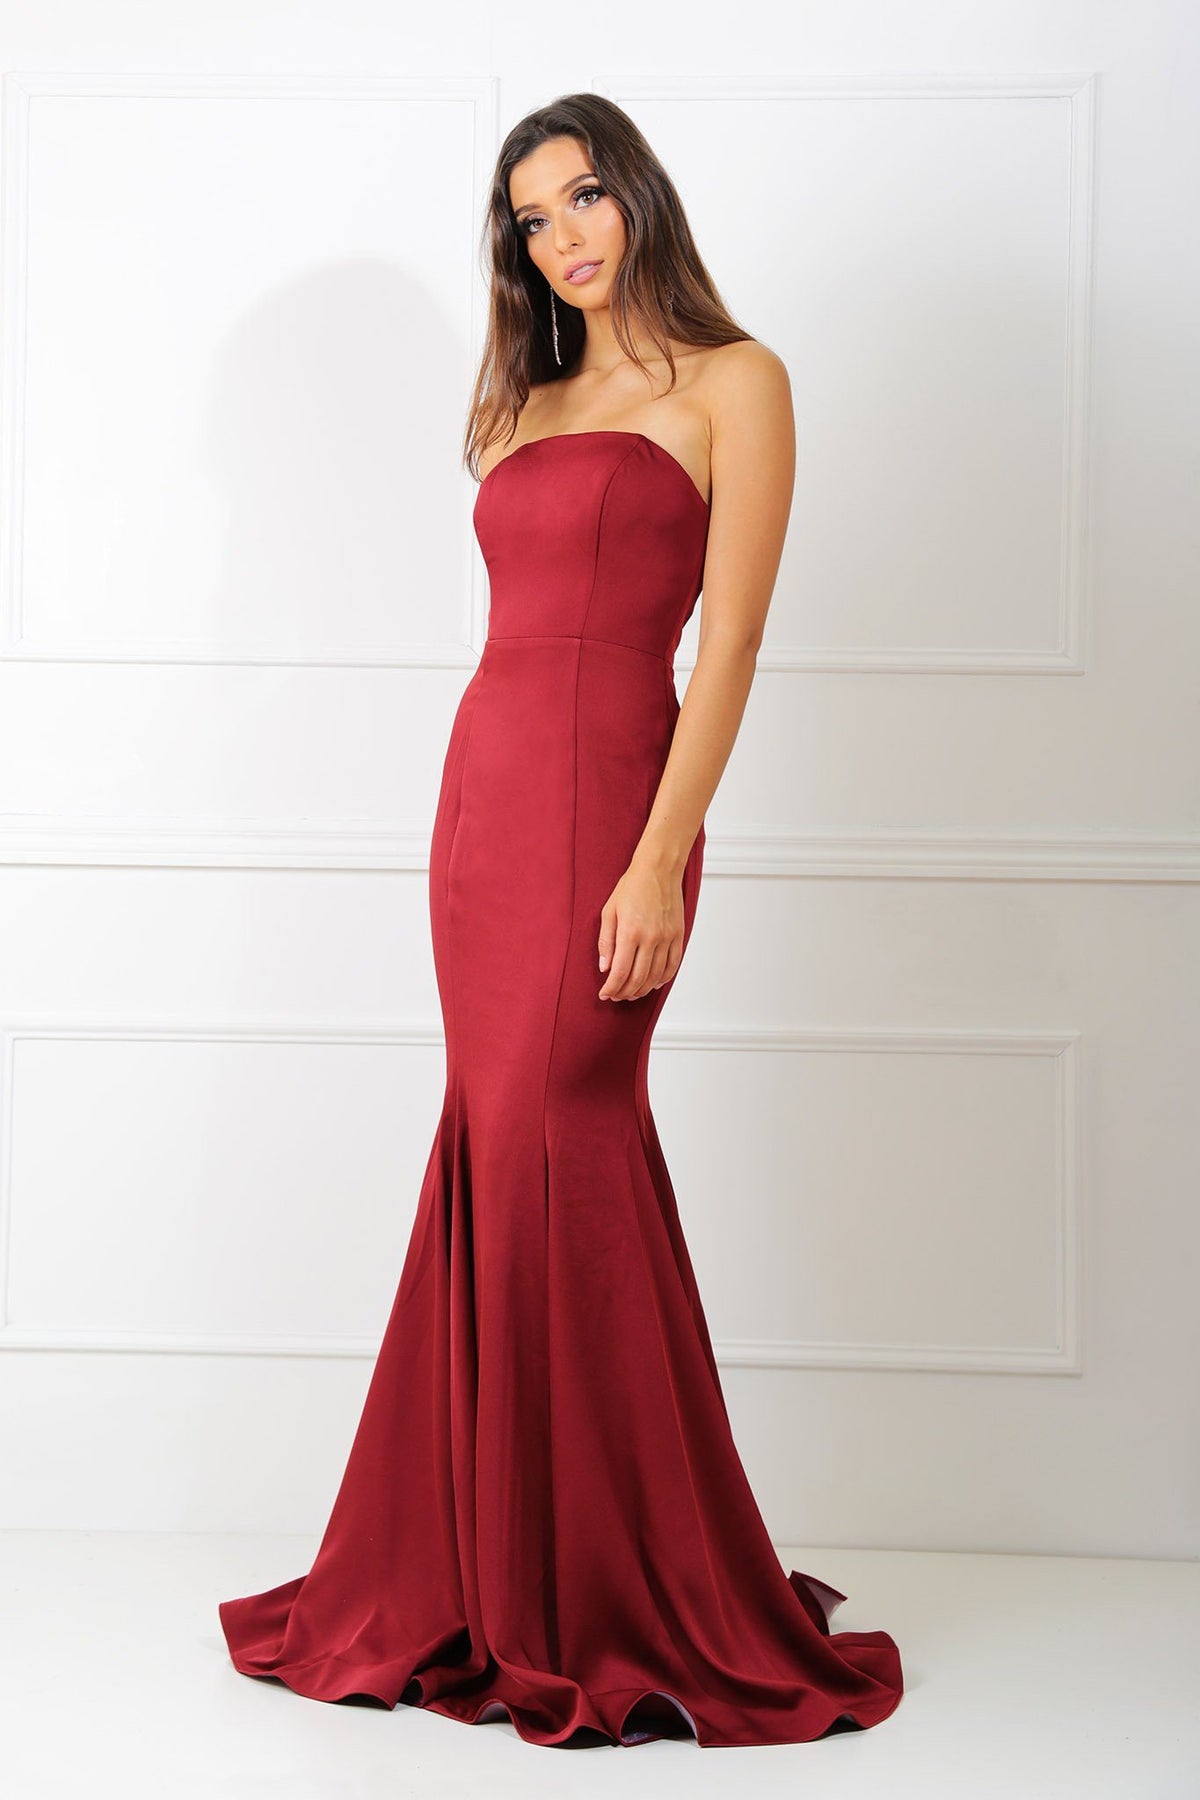 Wine red colored strapless straight neckline boned bodice fitted evening gown with floor sweeping train